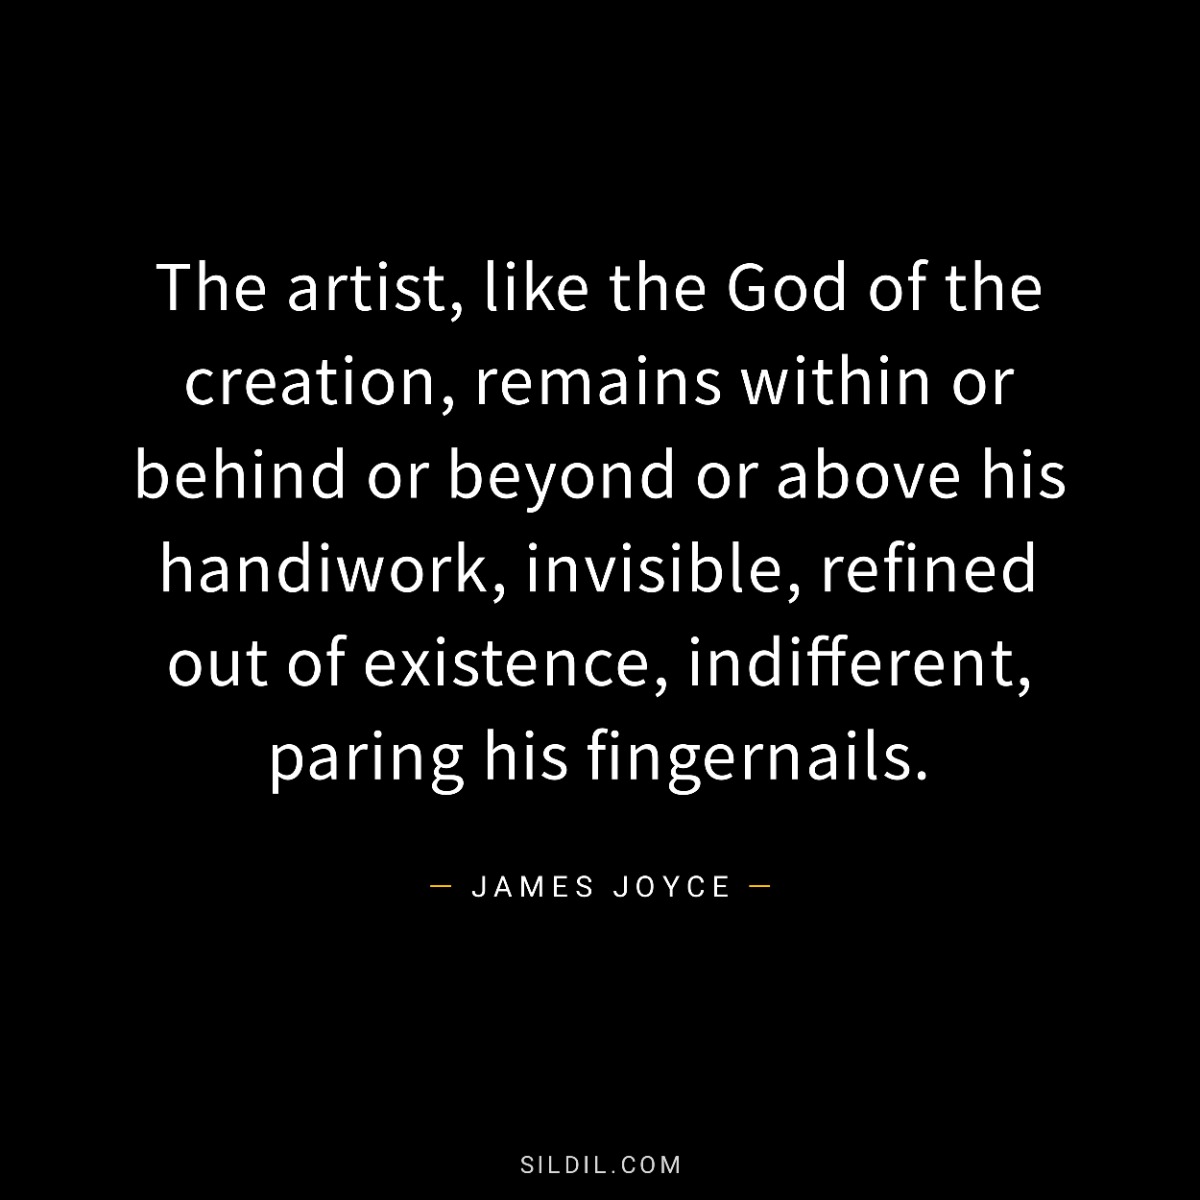 The artist, like the God of the creation, remains within or behind or beyond or above his handiwork, invisible, refined out of existence, indifferent, paring his fingernails.